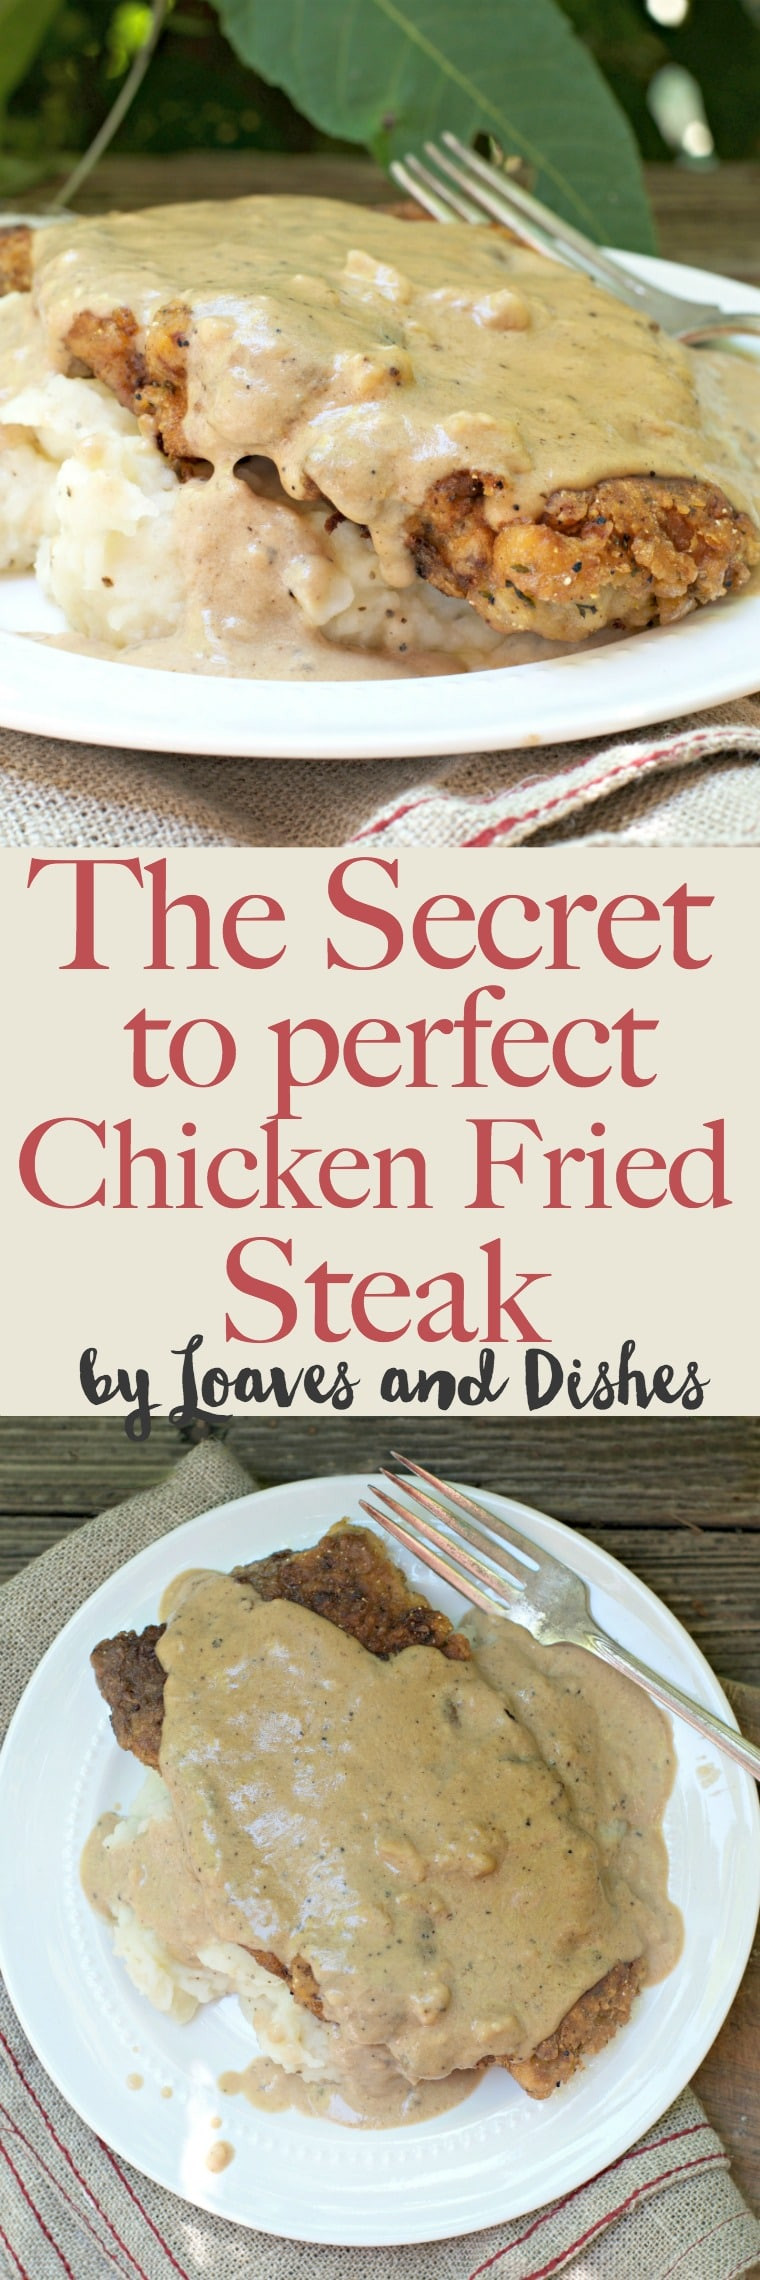 Paula Deen Chicken Fried Steak
 The Secret to Perfect Chicken Fried Steak Loaves and Dishes